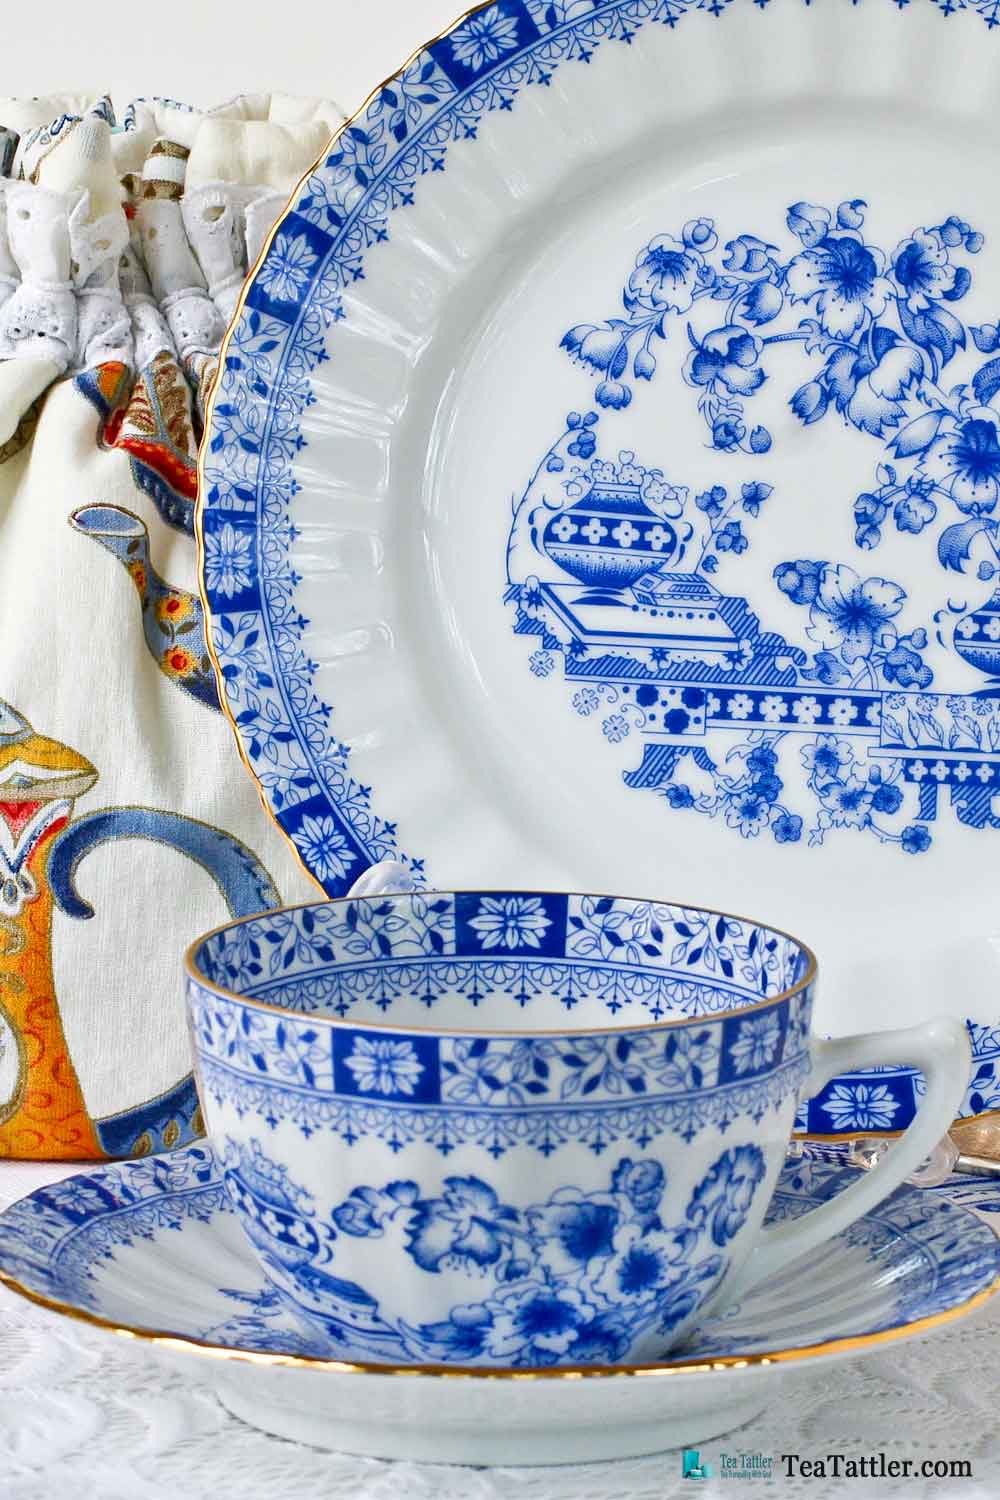 Dorothea China Blue by Seltmann Weiden, Germany teacup and saucer in classic blue and white design adorned with floral and leaf motifs. | TeaTattler.com #dorotheachinablue #teacup